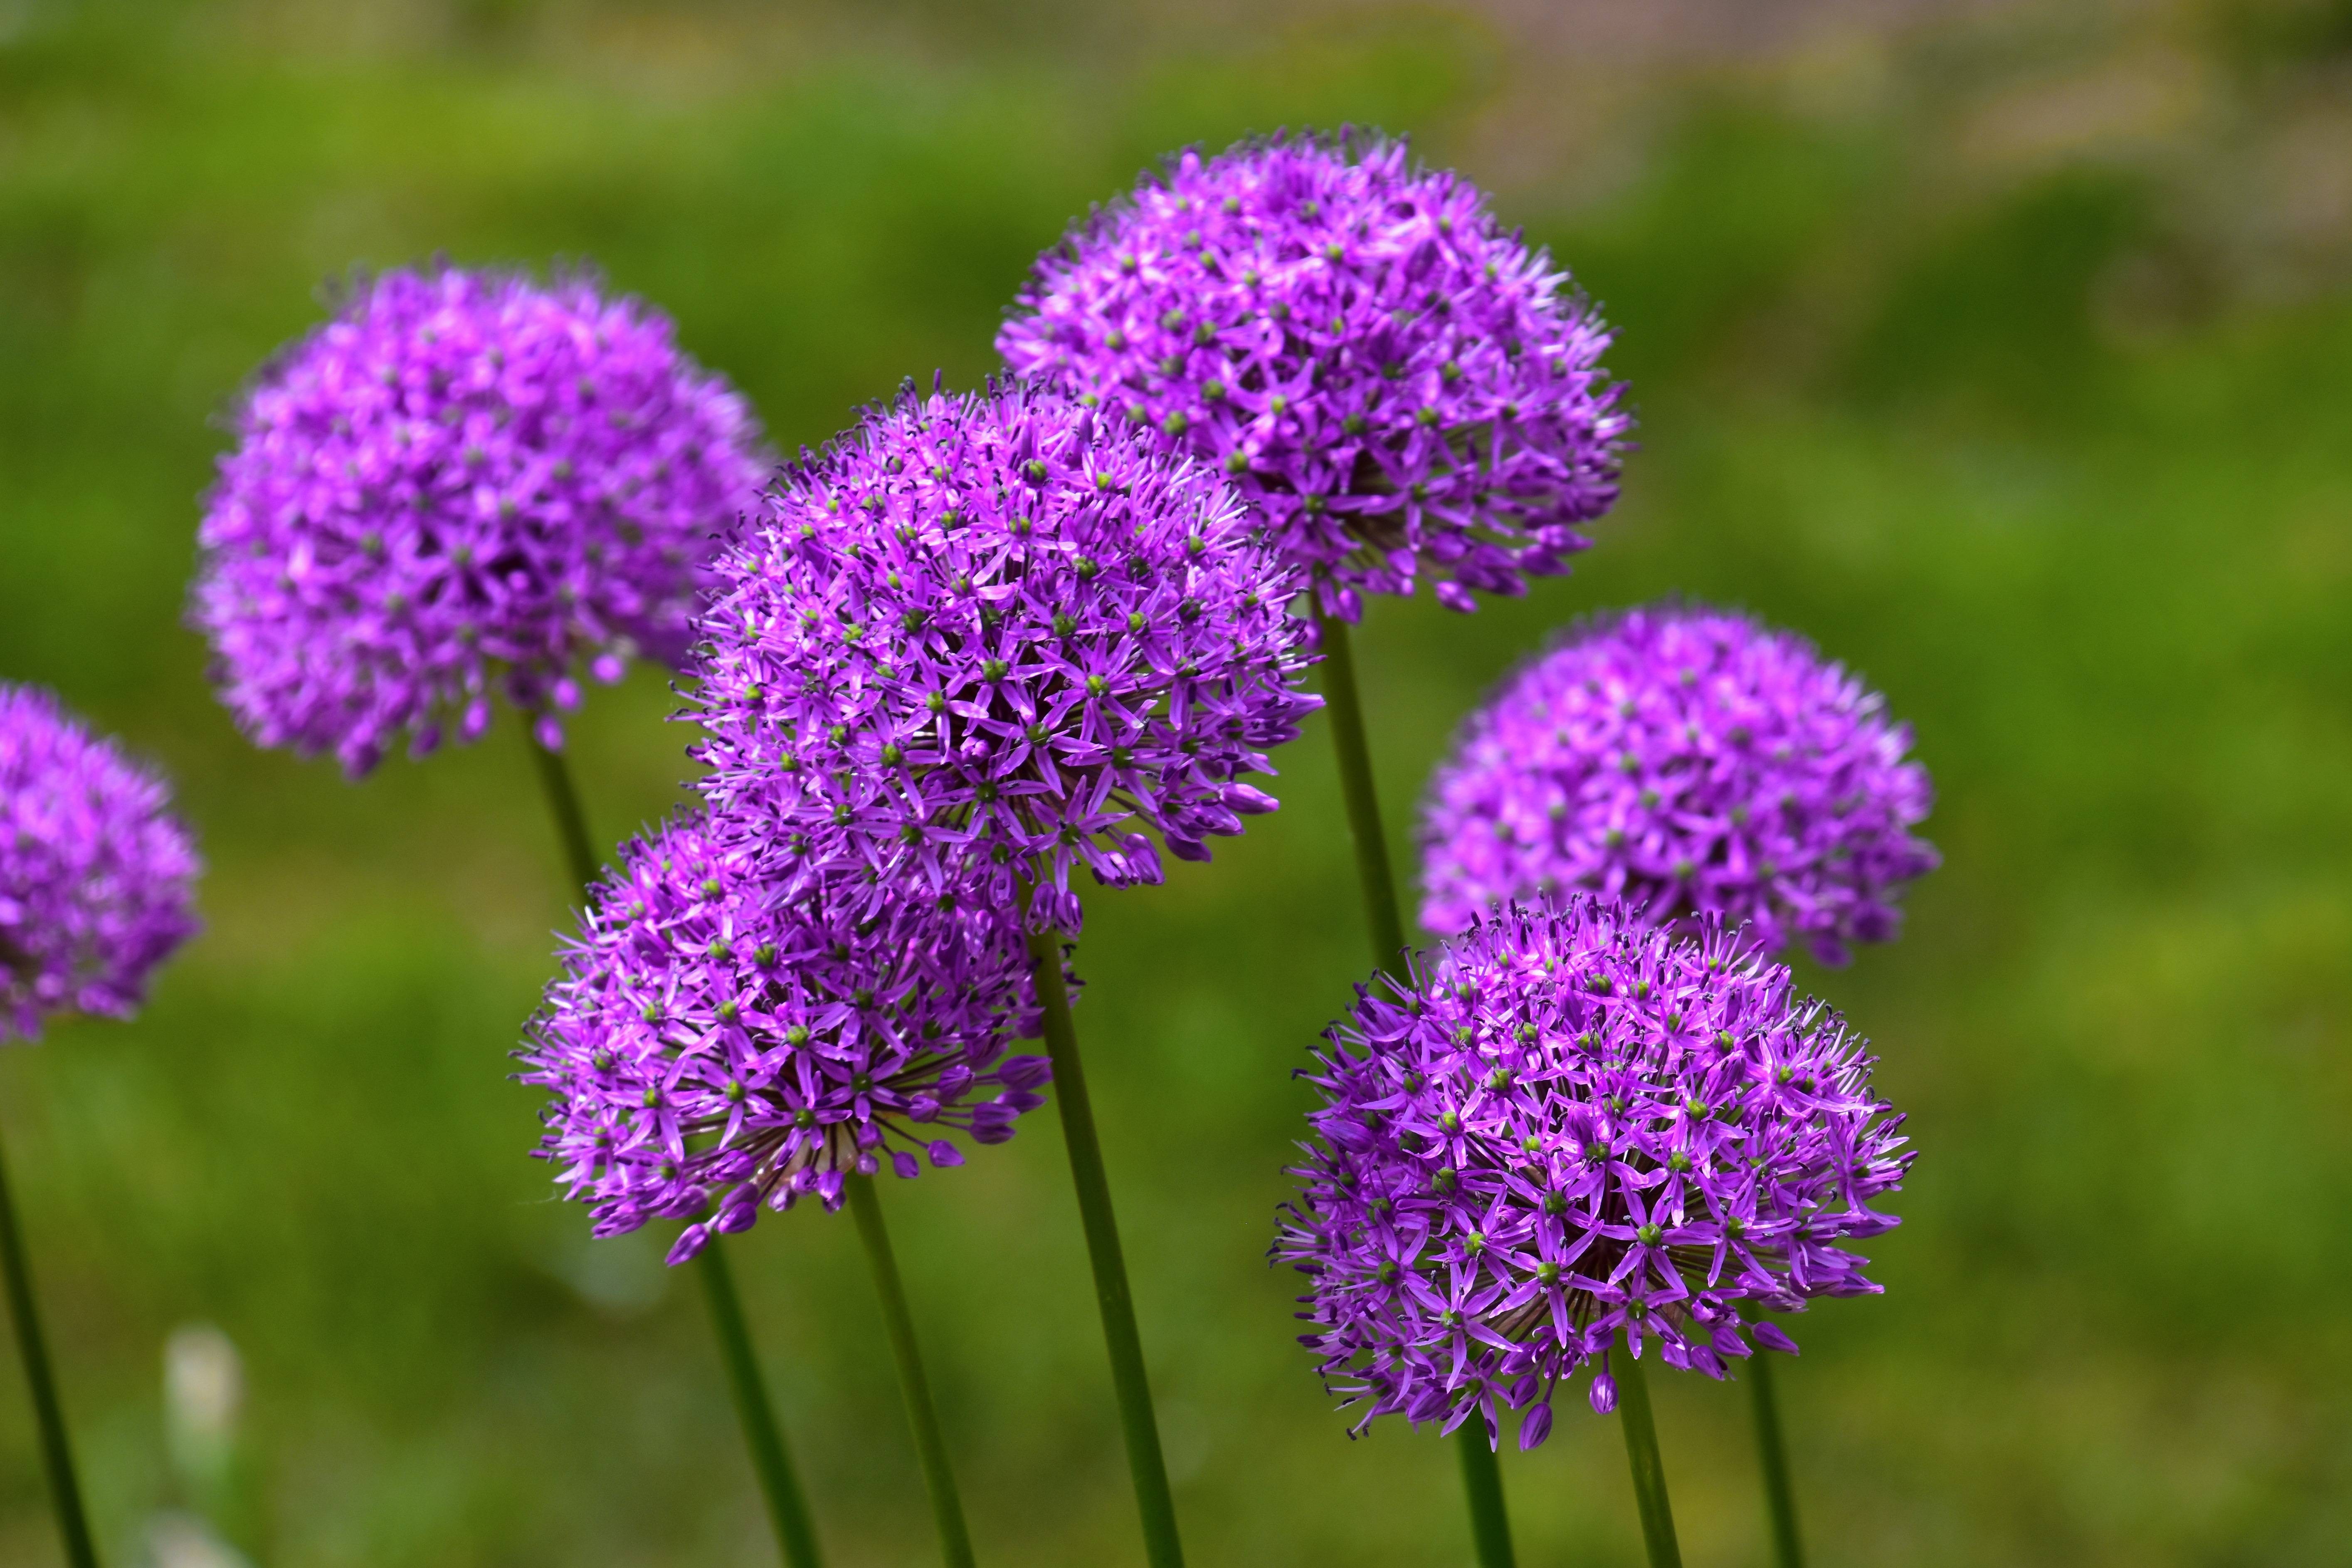 purple flowers with green-brown stems
